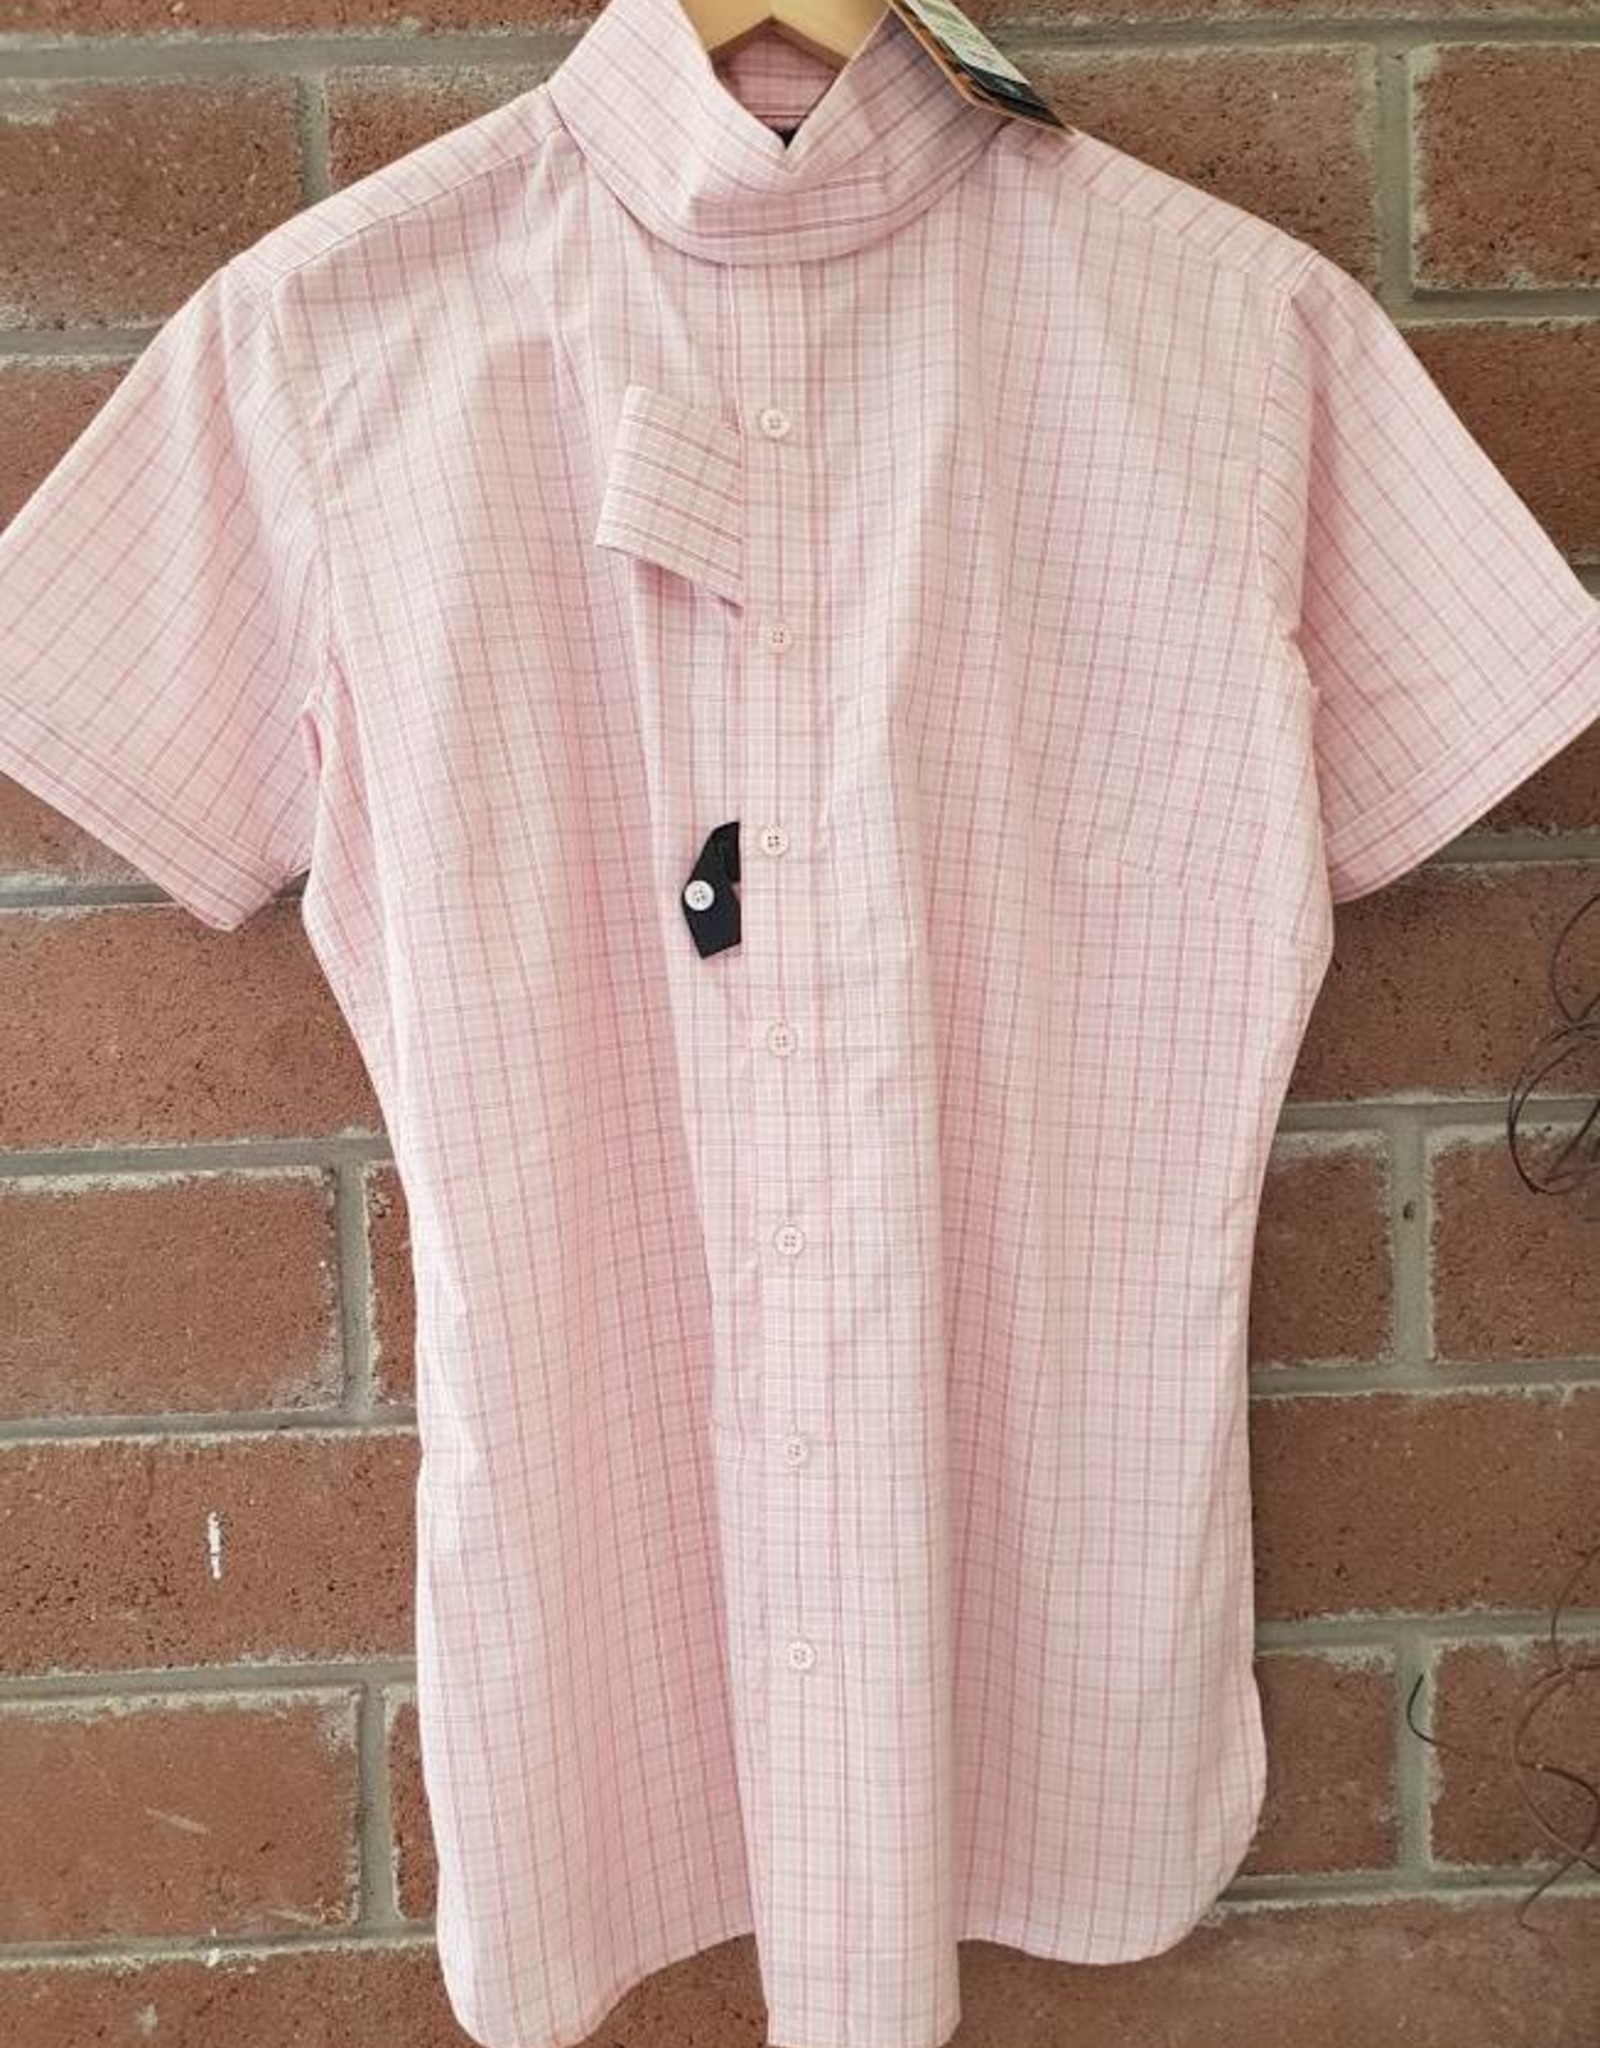 Ariat Ariat Victory Short Sleeve Show Shirt- Pink/White - Size 34